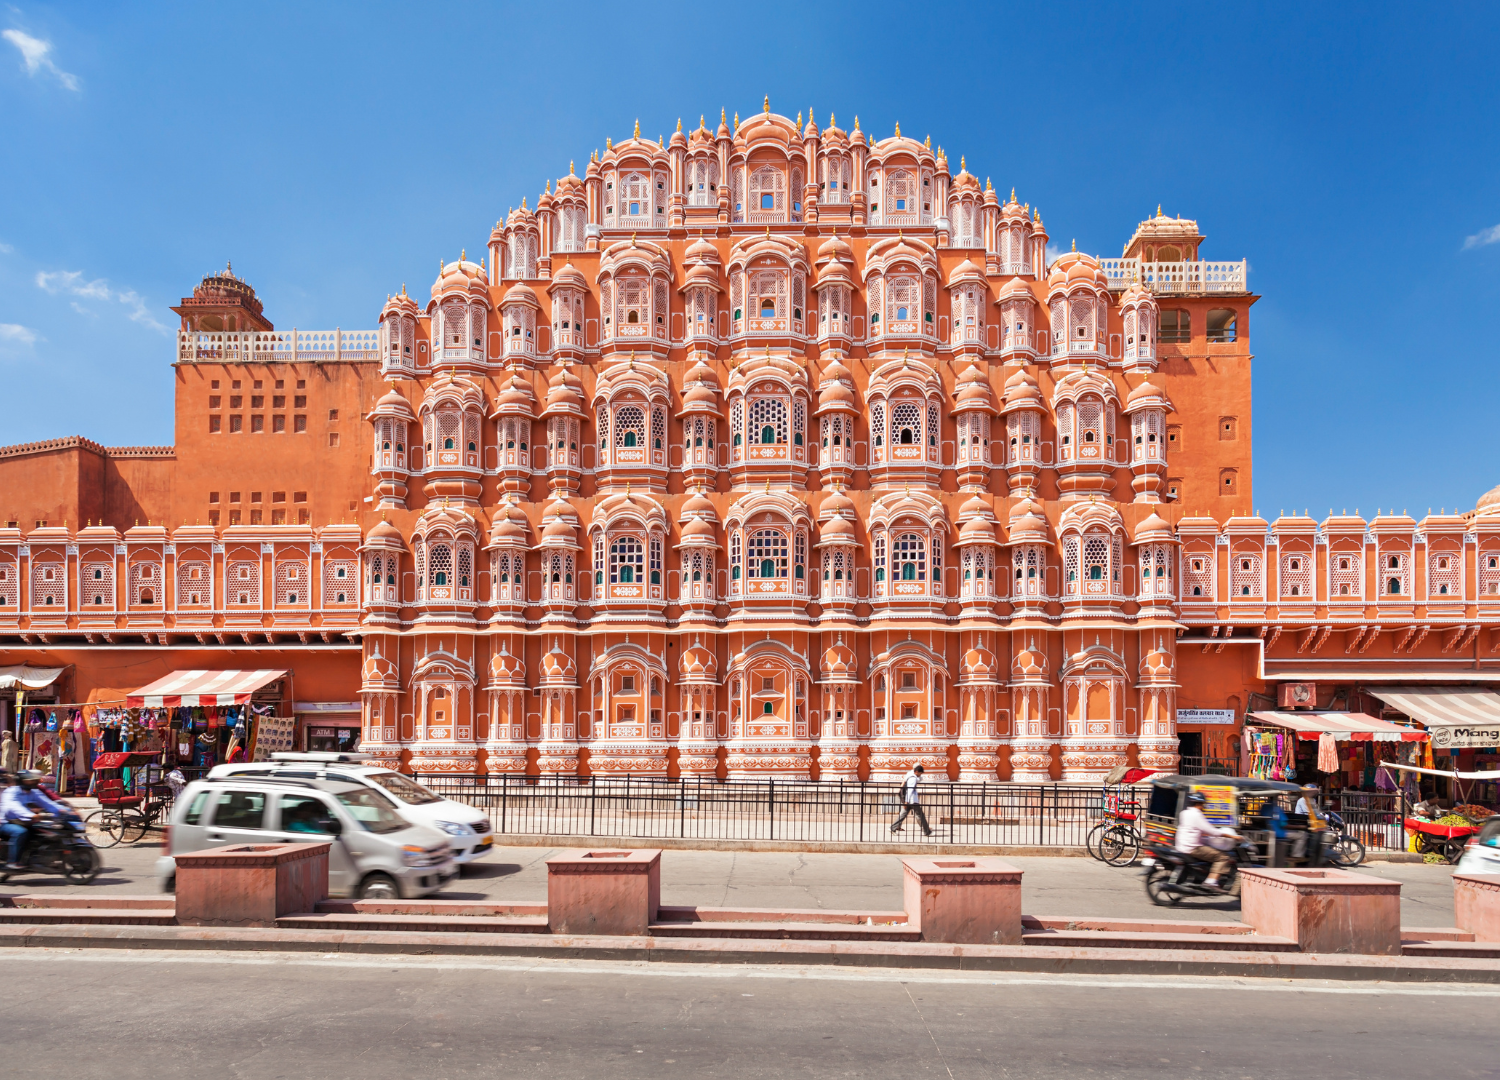 An ornate pink multi-story building in Jaipur